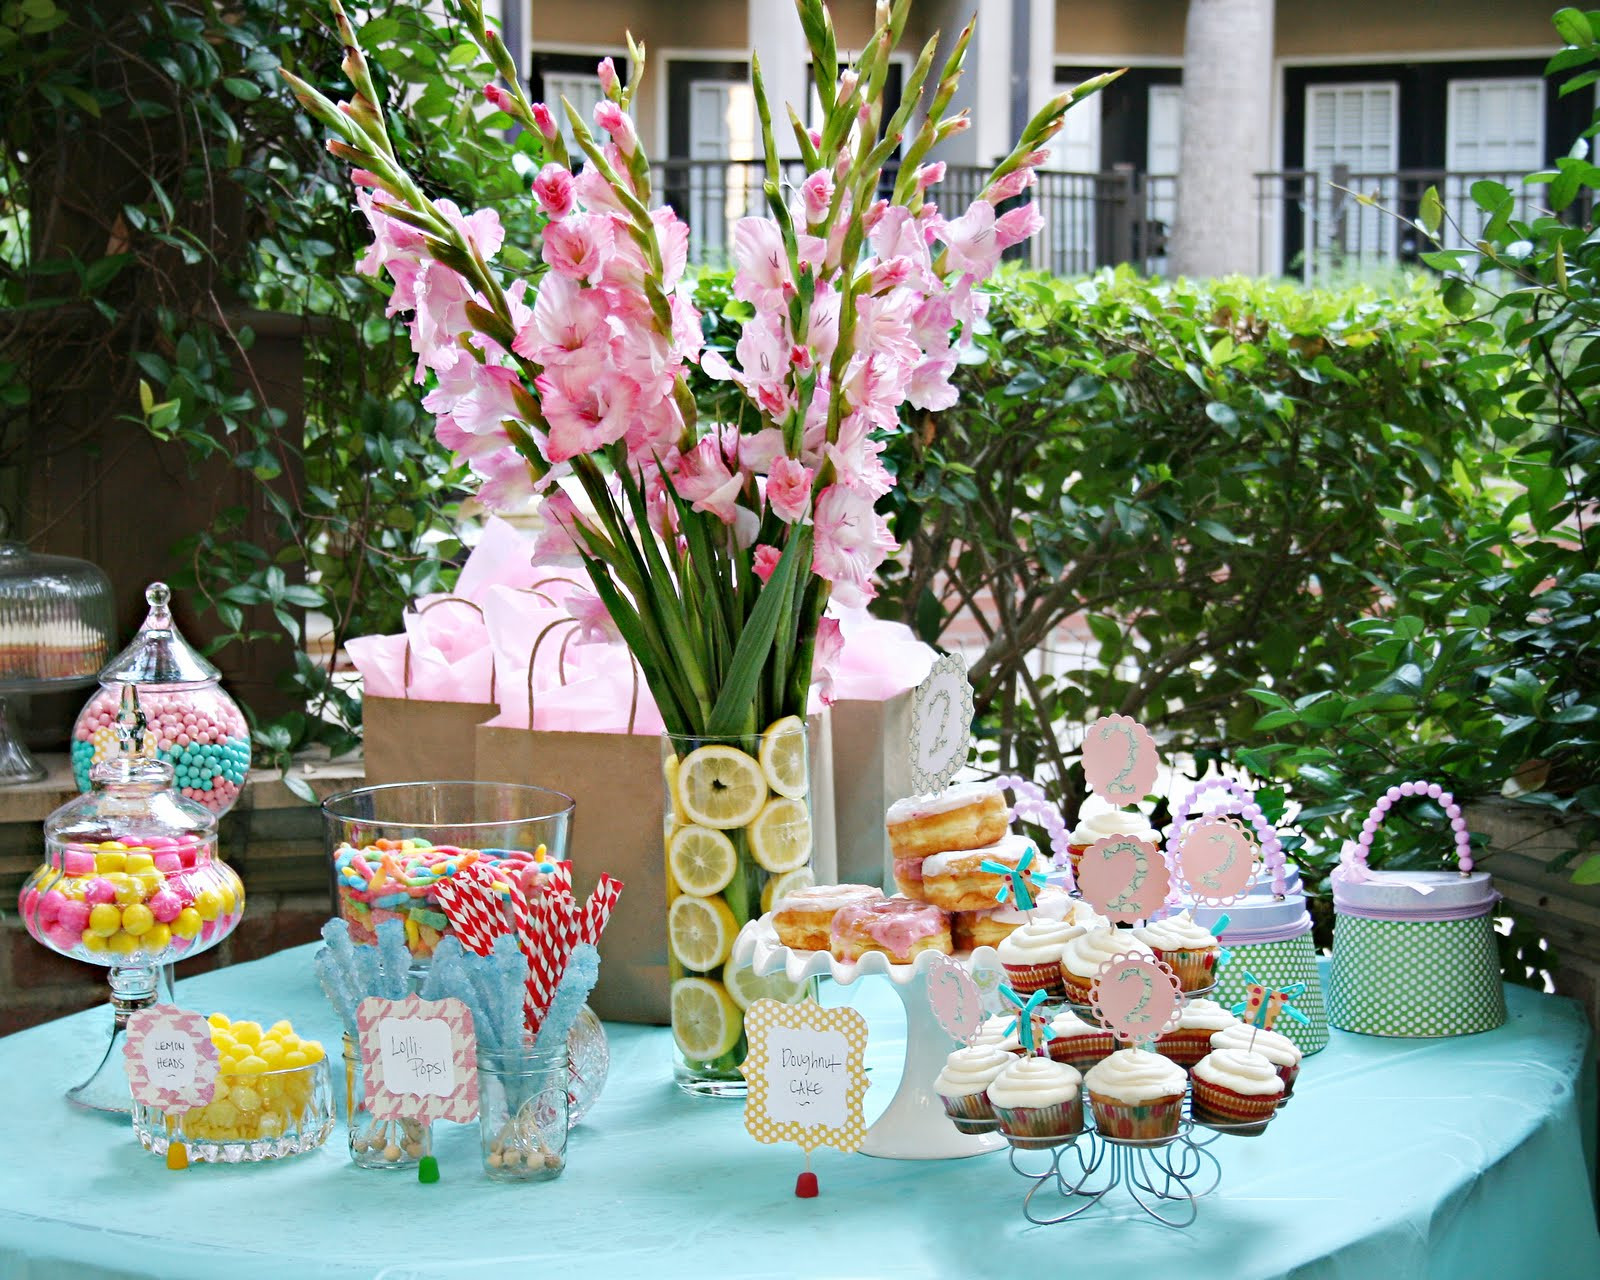 Sweet Sixteen Pool Party Ideas
 Cook Bake & Decorate Girly Pool Party